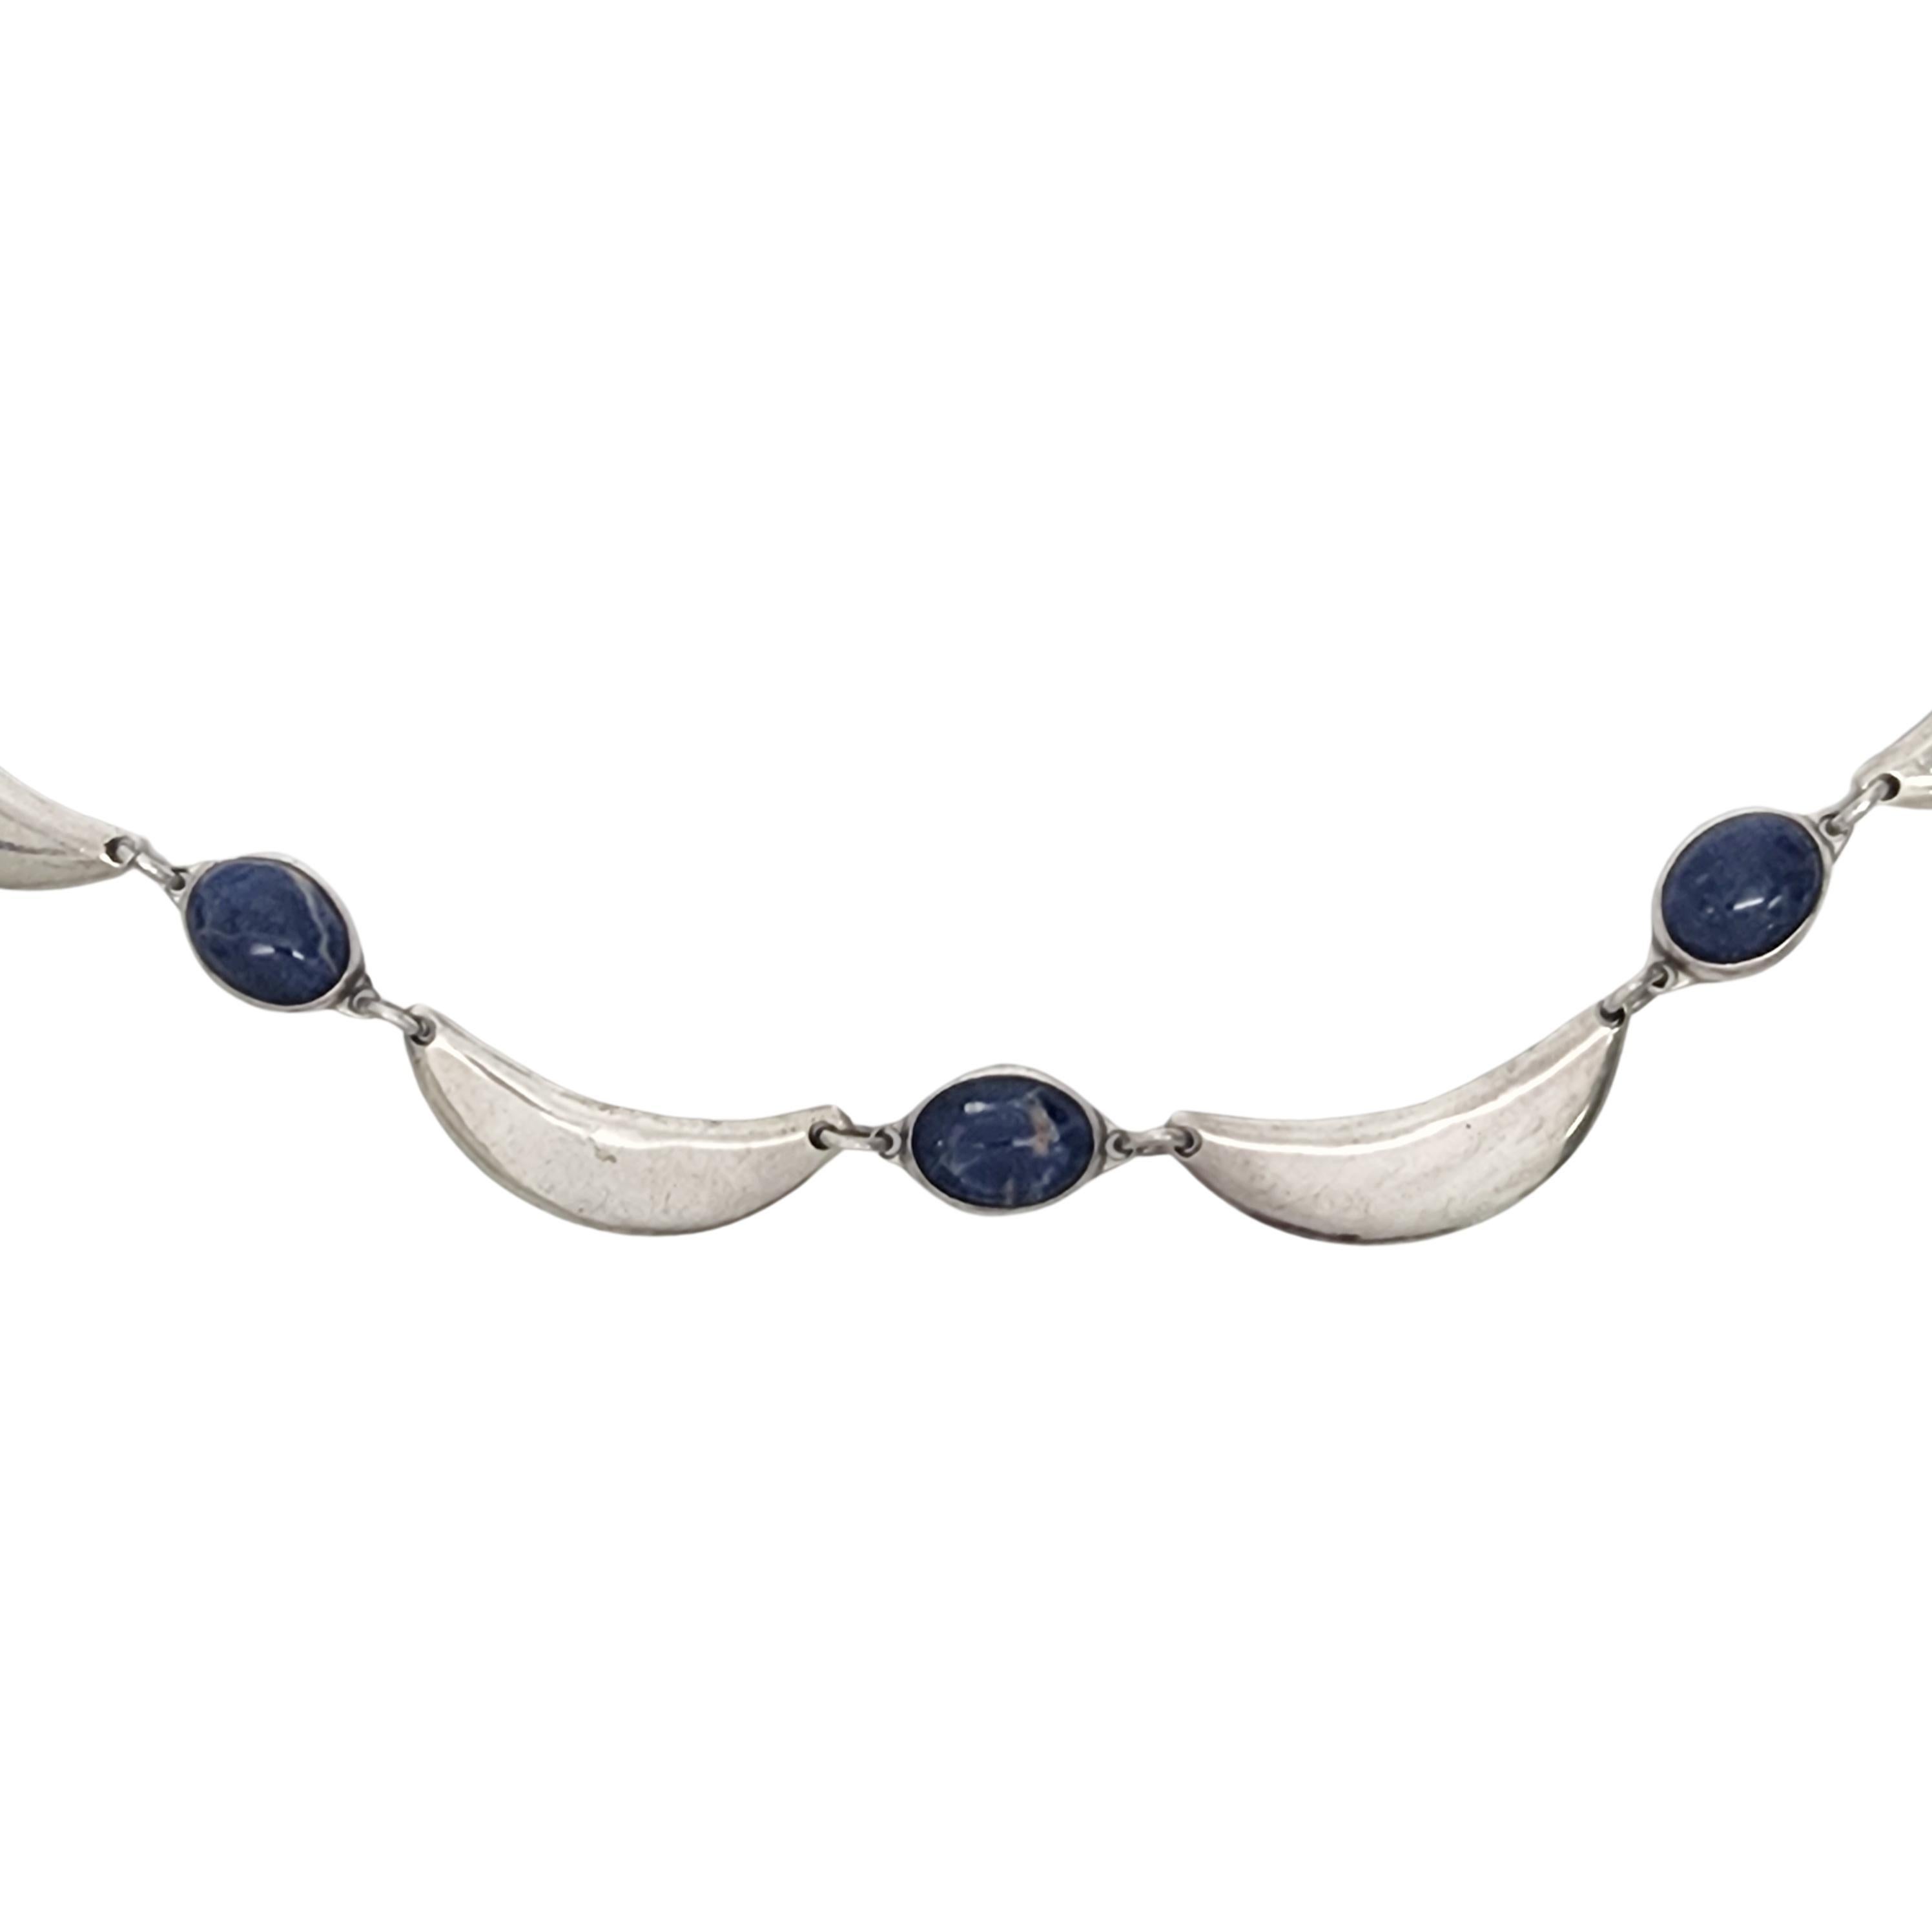 Cabochon Sterling Silver Mexico Lapis Lazuli Boomerang Link Necklace #16496 For Sale